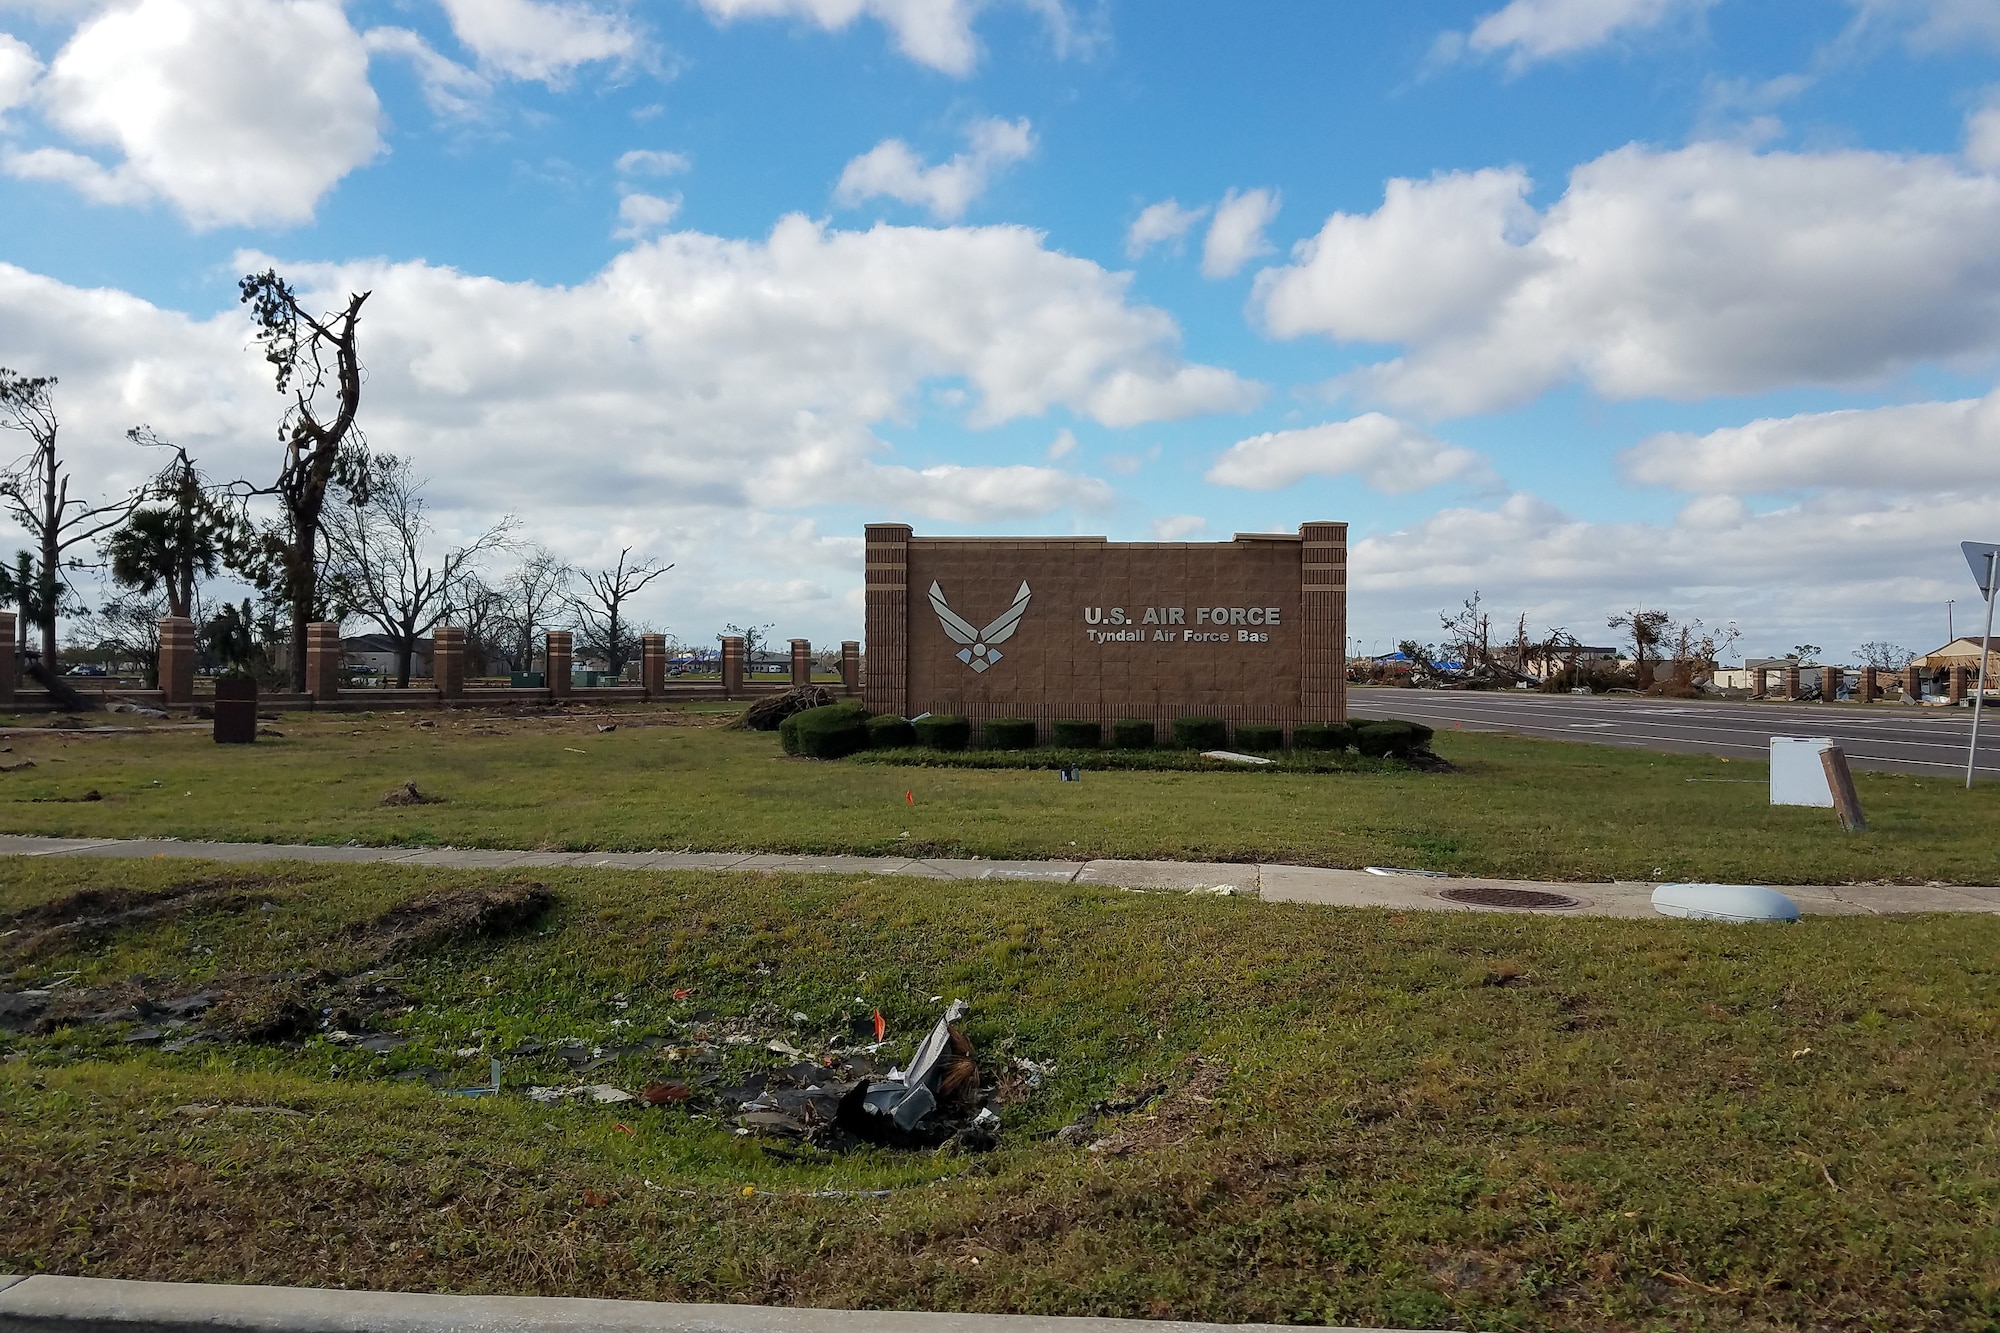 A team of nine U.S. Airmen from the South Carolina Air National Guard’s 169th Civil Engineer and Medical Squadrons volunteered to help nudge Tyndall Air Force Base in Florida toward recovery after Hurricane Michael left the base in near complete destruction October 22-28, 2018. (U.S. Air National Guard courtesy photo)